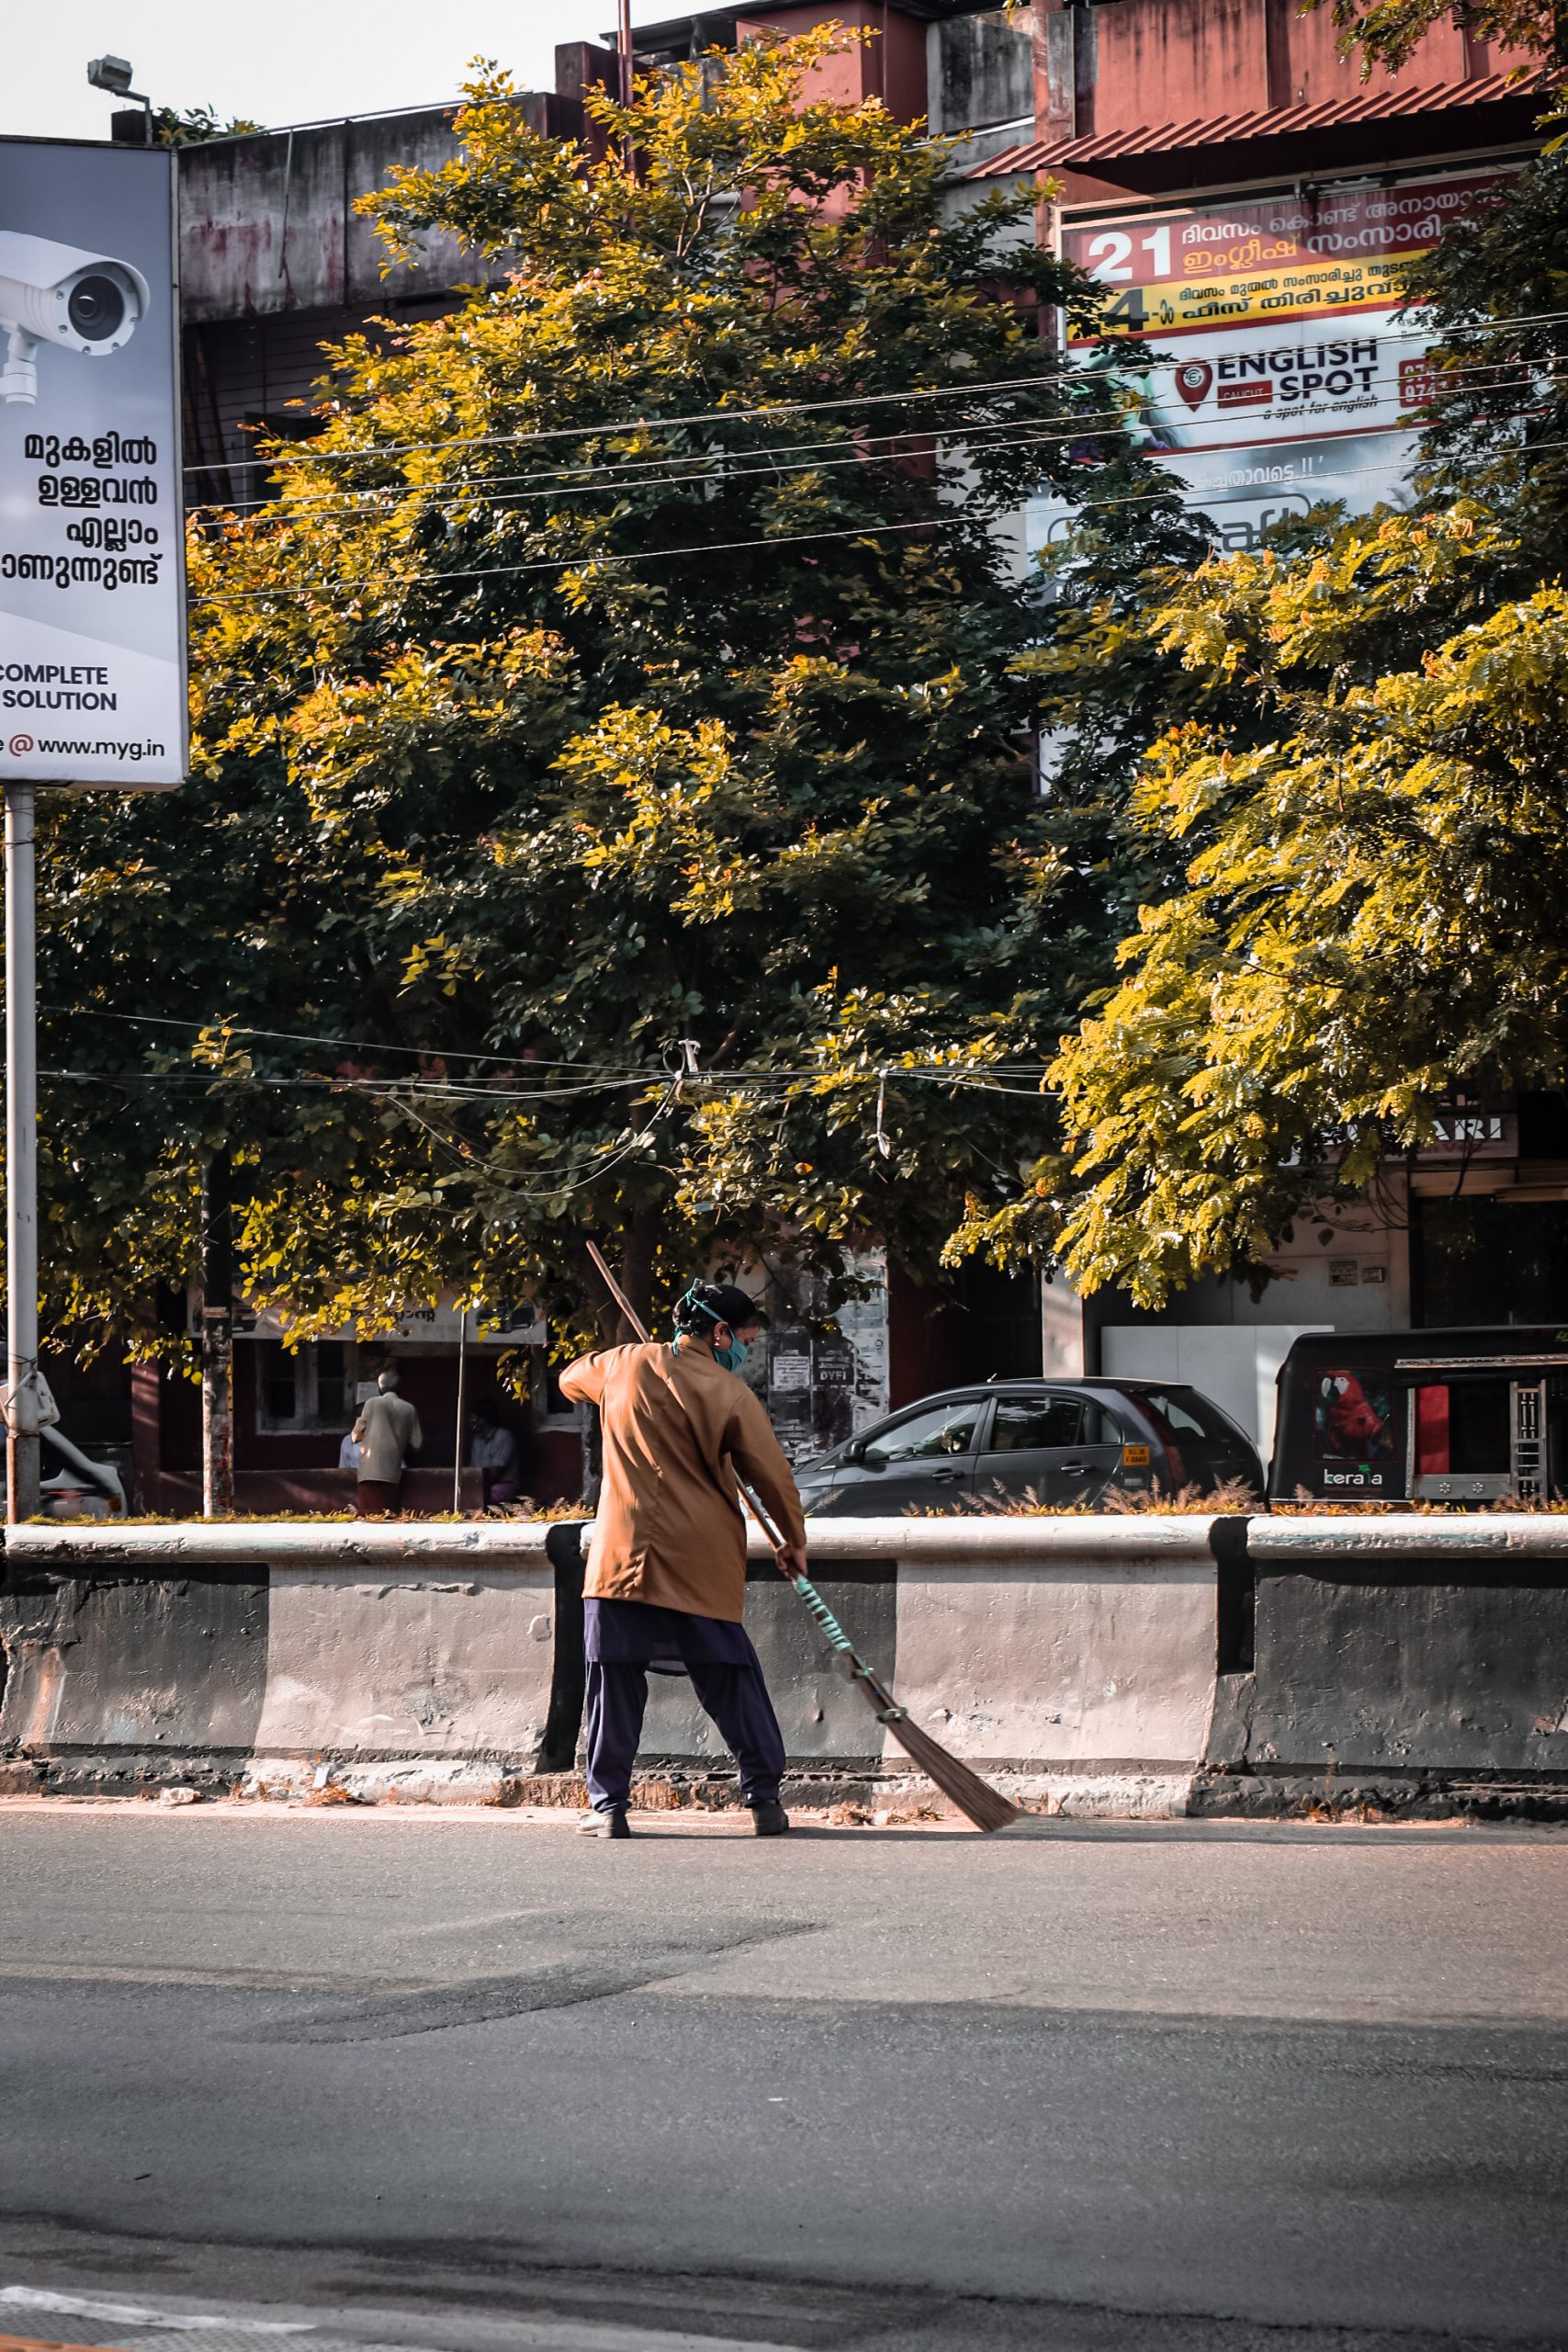 A man cleaning the road